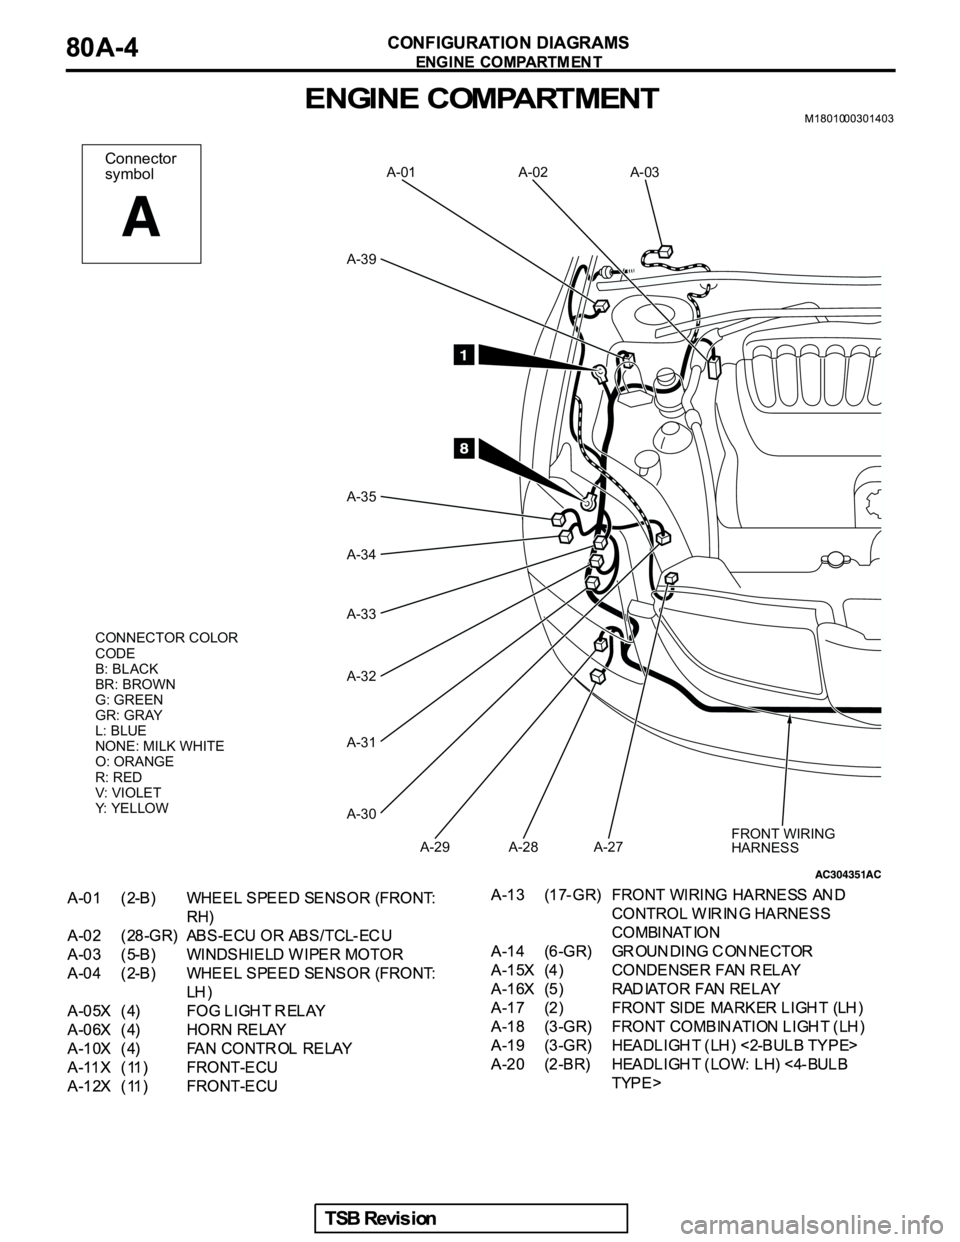 MITSUBISHI GALANT 2005  Service Repair Manual Connector
symbol
CONNECTOR COLOR
CODE
B: BLACK
BR: BROWN
G: GREEN
GR: GRAY
L: BLUE
NONE: MILK WHITE
O: ORANGE
R: RED
V: VIOLET
Y: YELLOW
FRONT WIRING
HARNESS A-03
A-02 A-01
A-39
A-35
A-34
A-33
A-32
A-